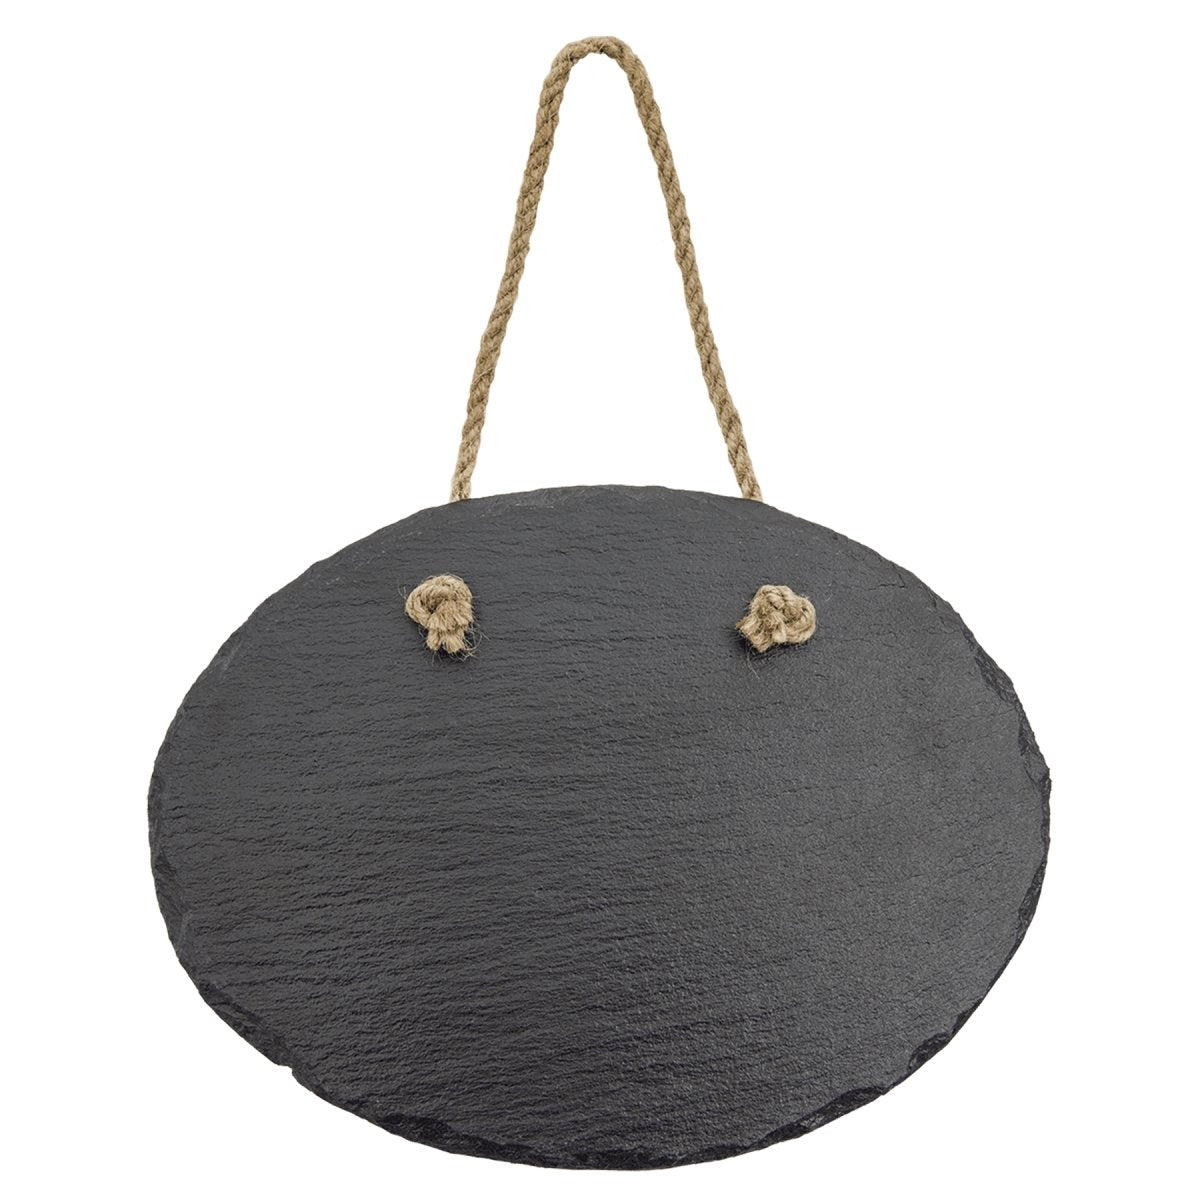 Laserable Slate Decor with Hanger String, Oval 7.75" x 6" - Inkfinitee Sublimation